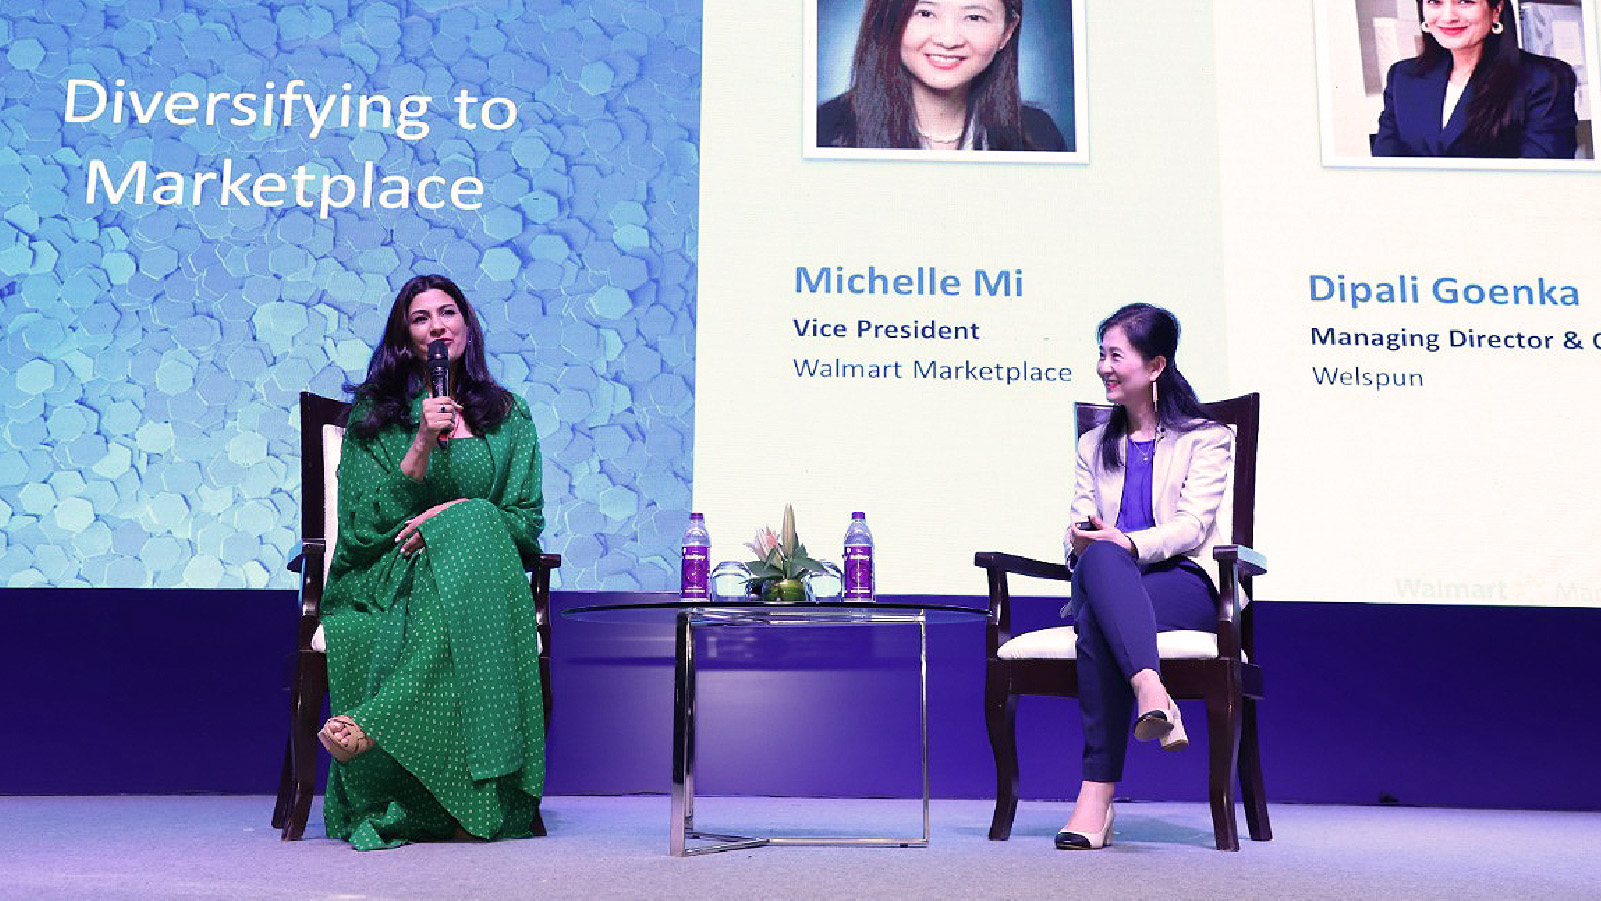 Indian woman in green sari, speaking into a microphone. On right sits an Asian American woman, listening attentively. Background reads: Diversifying the Marketplace.